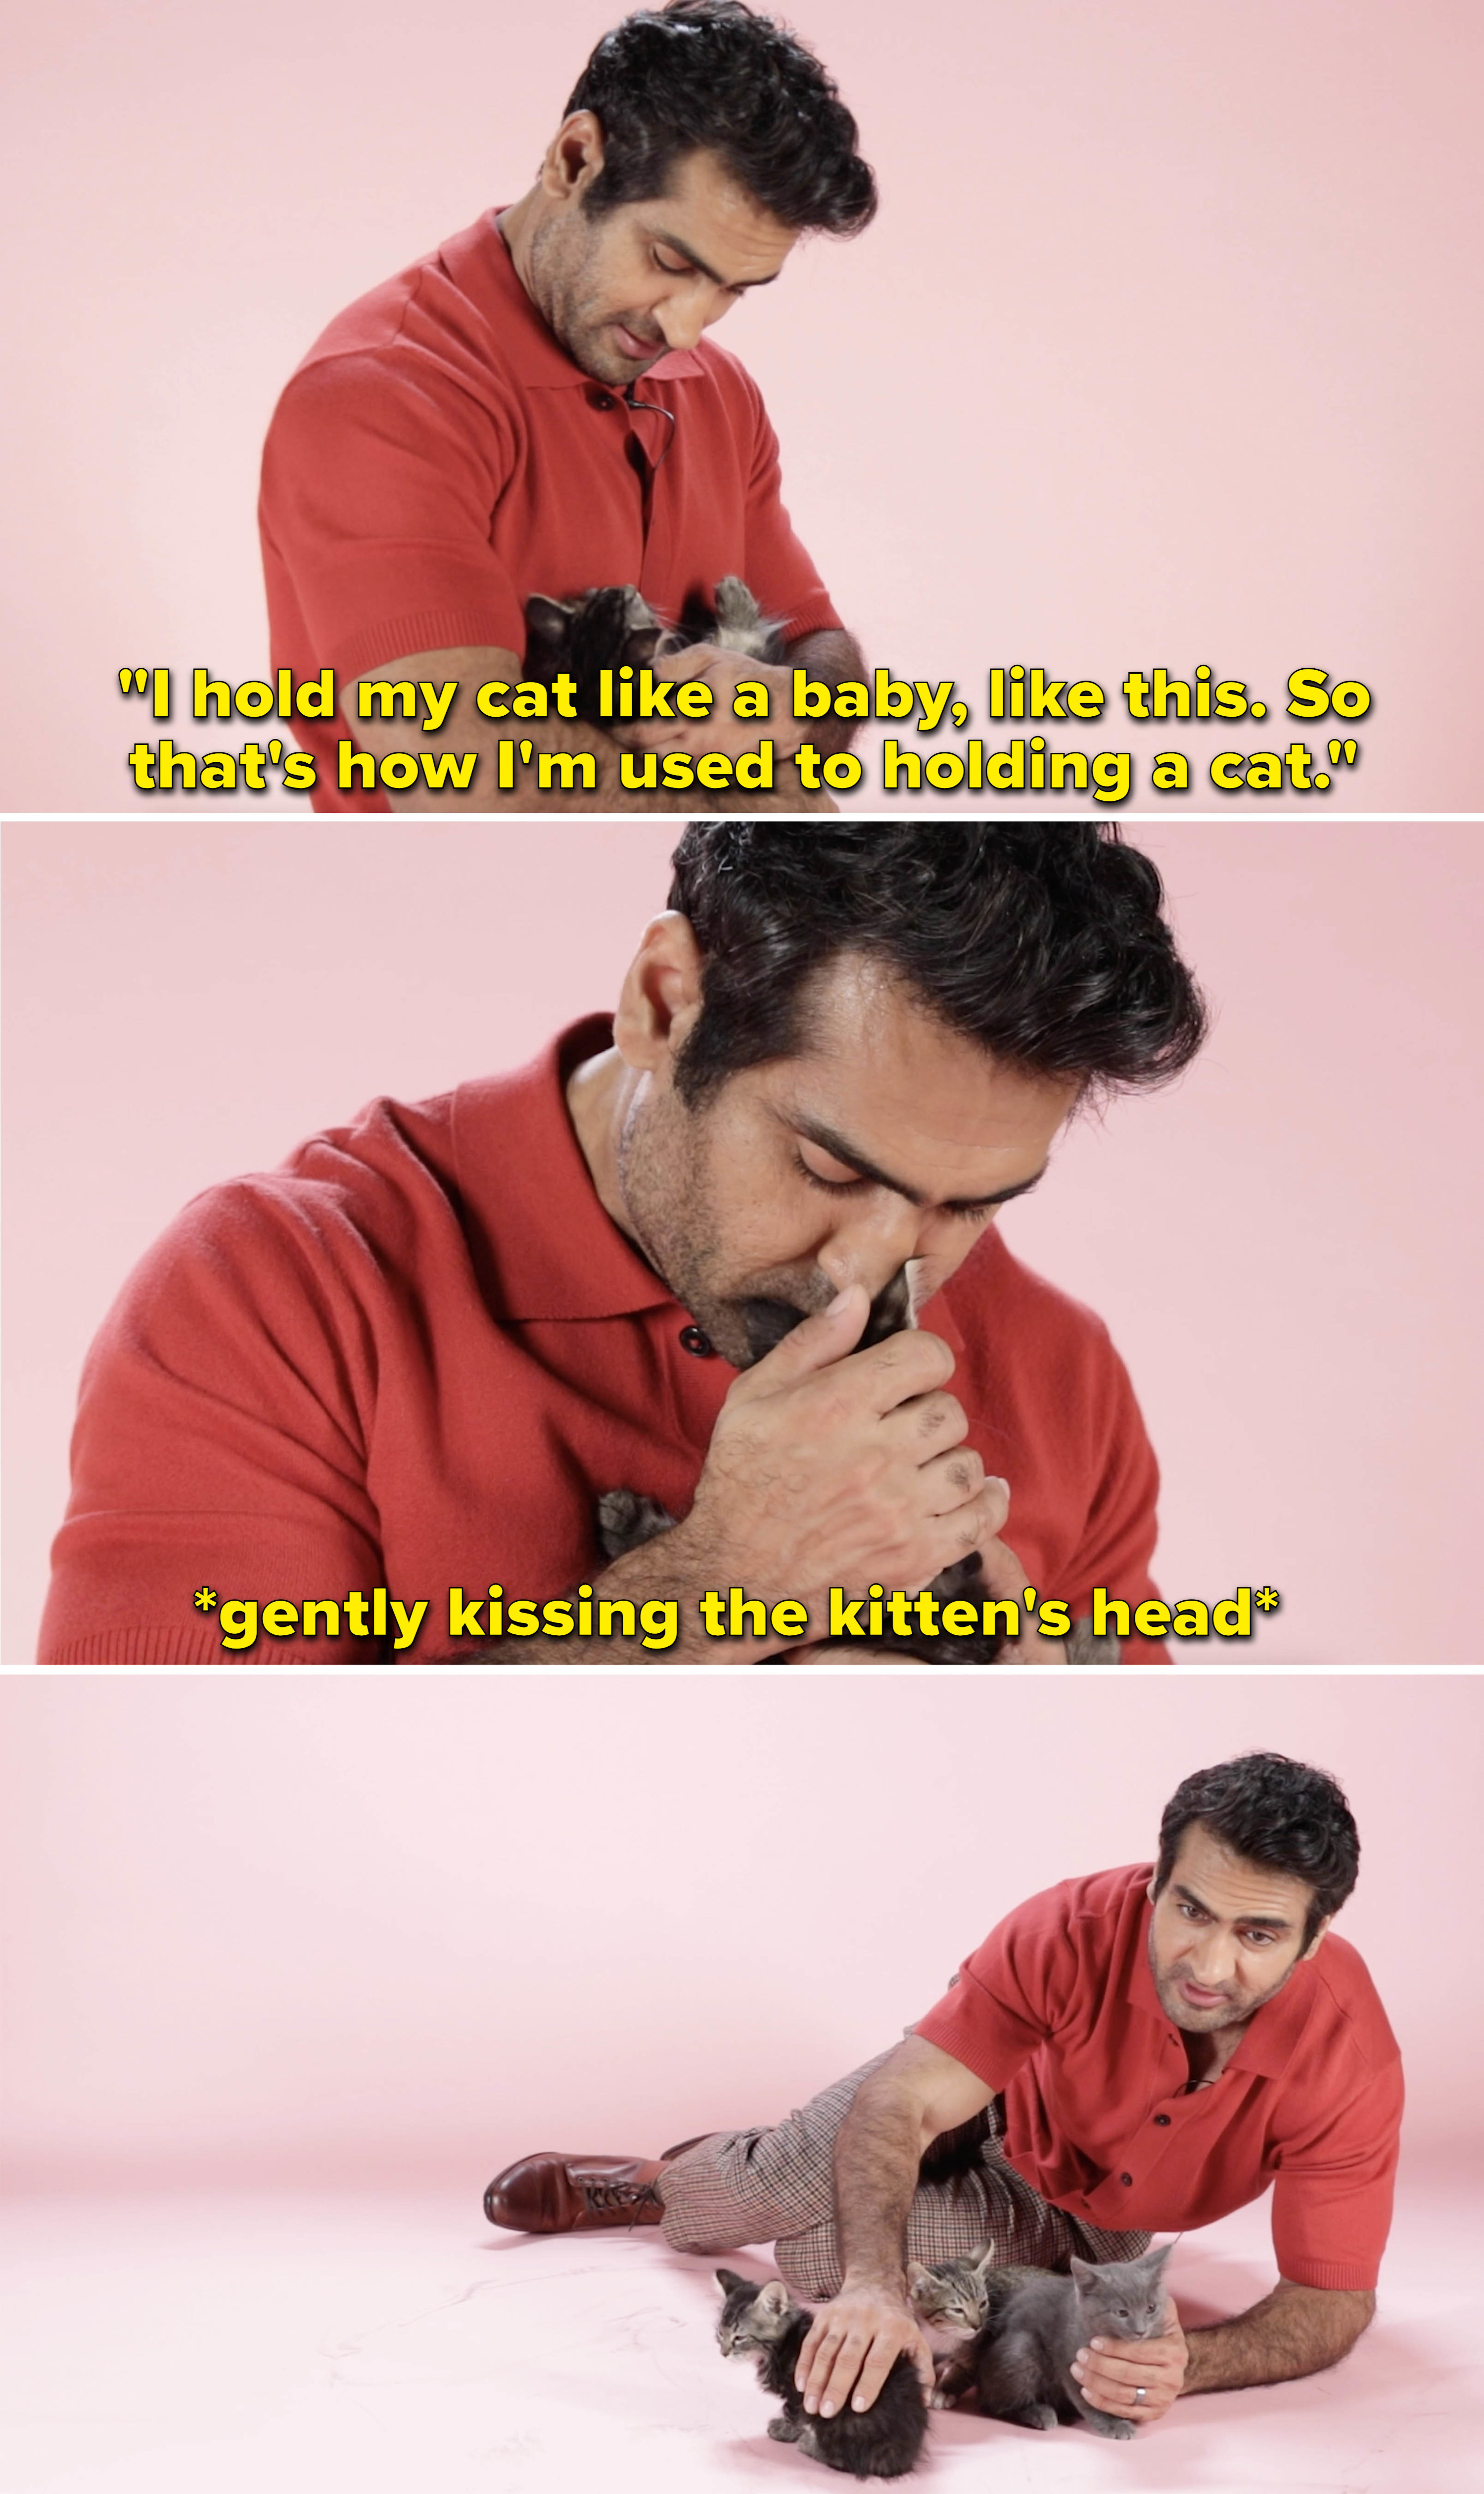 Kumail kissing a kitten&#x27;s head and saying &quot;I hold my cat like a baby, like this, so that&#x27;s how I&#x27;m used to holding a cat&quot;